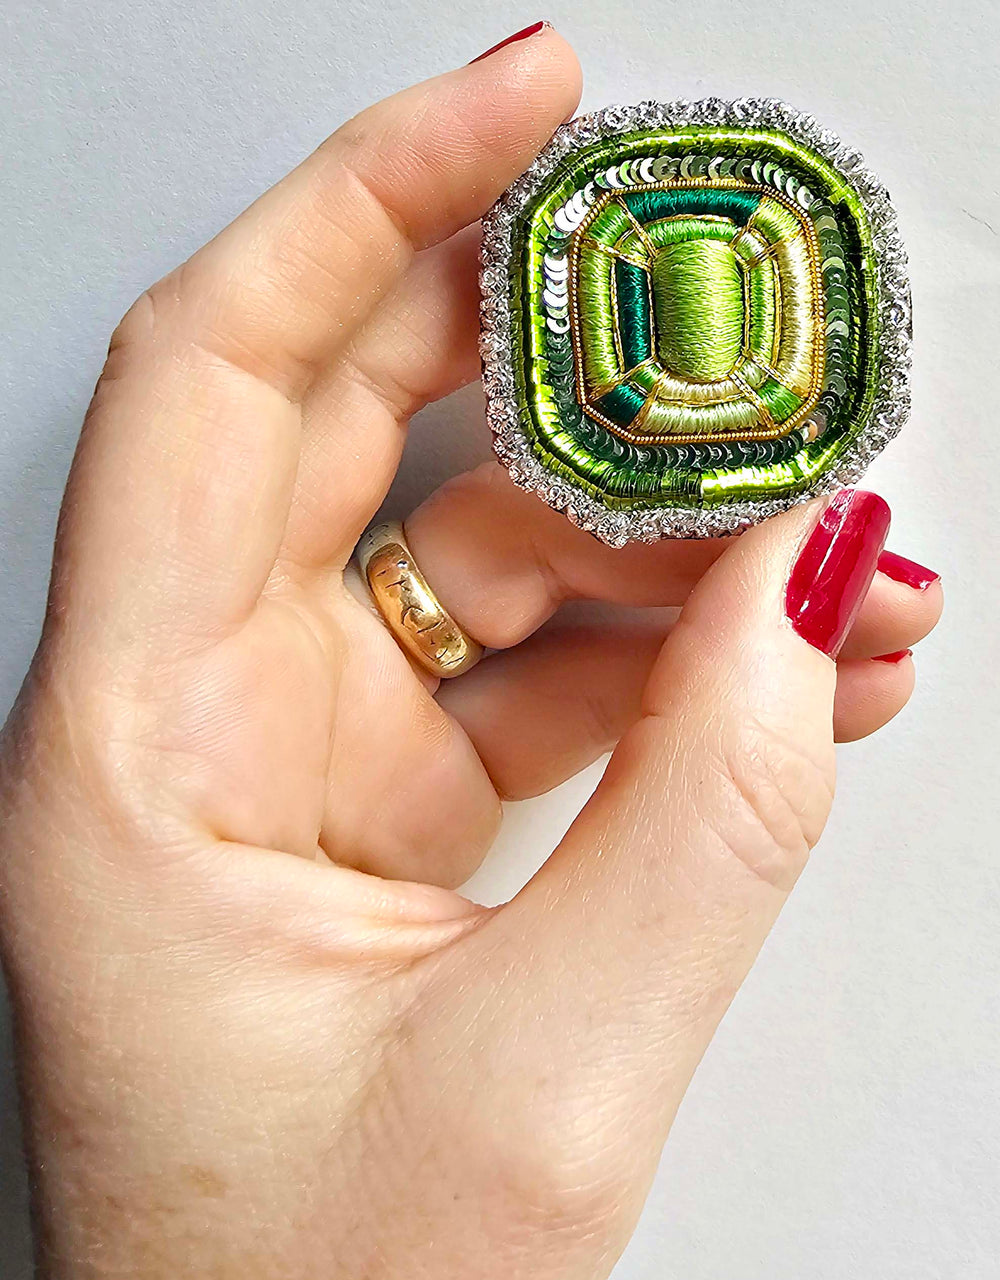 Trompe l'oeil emerald brooch / Pre-order, available end of October